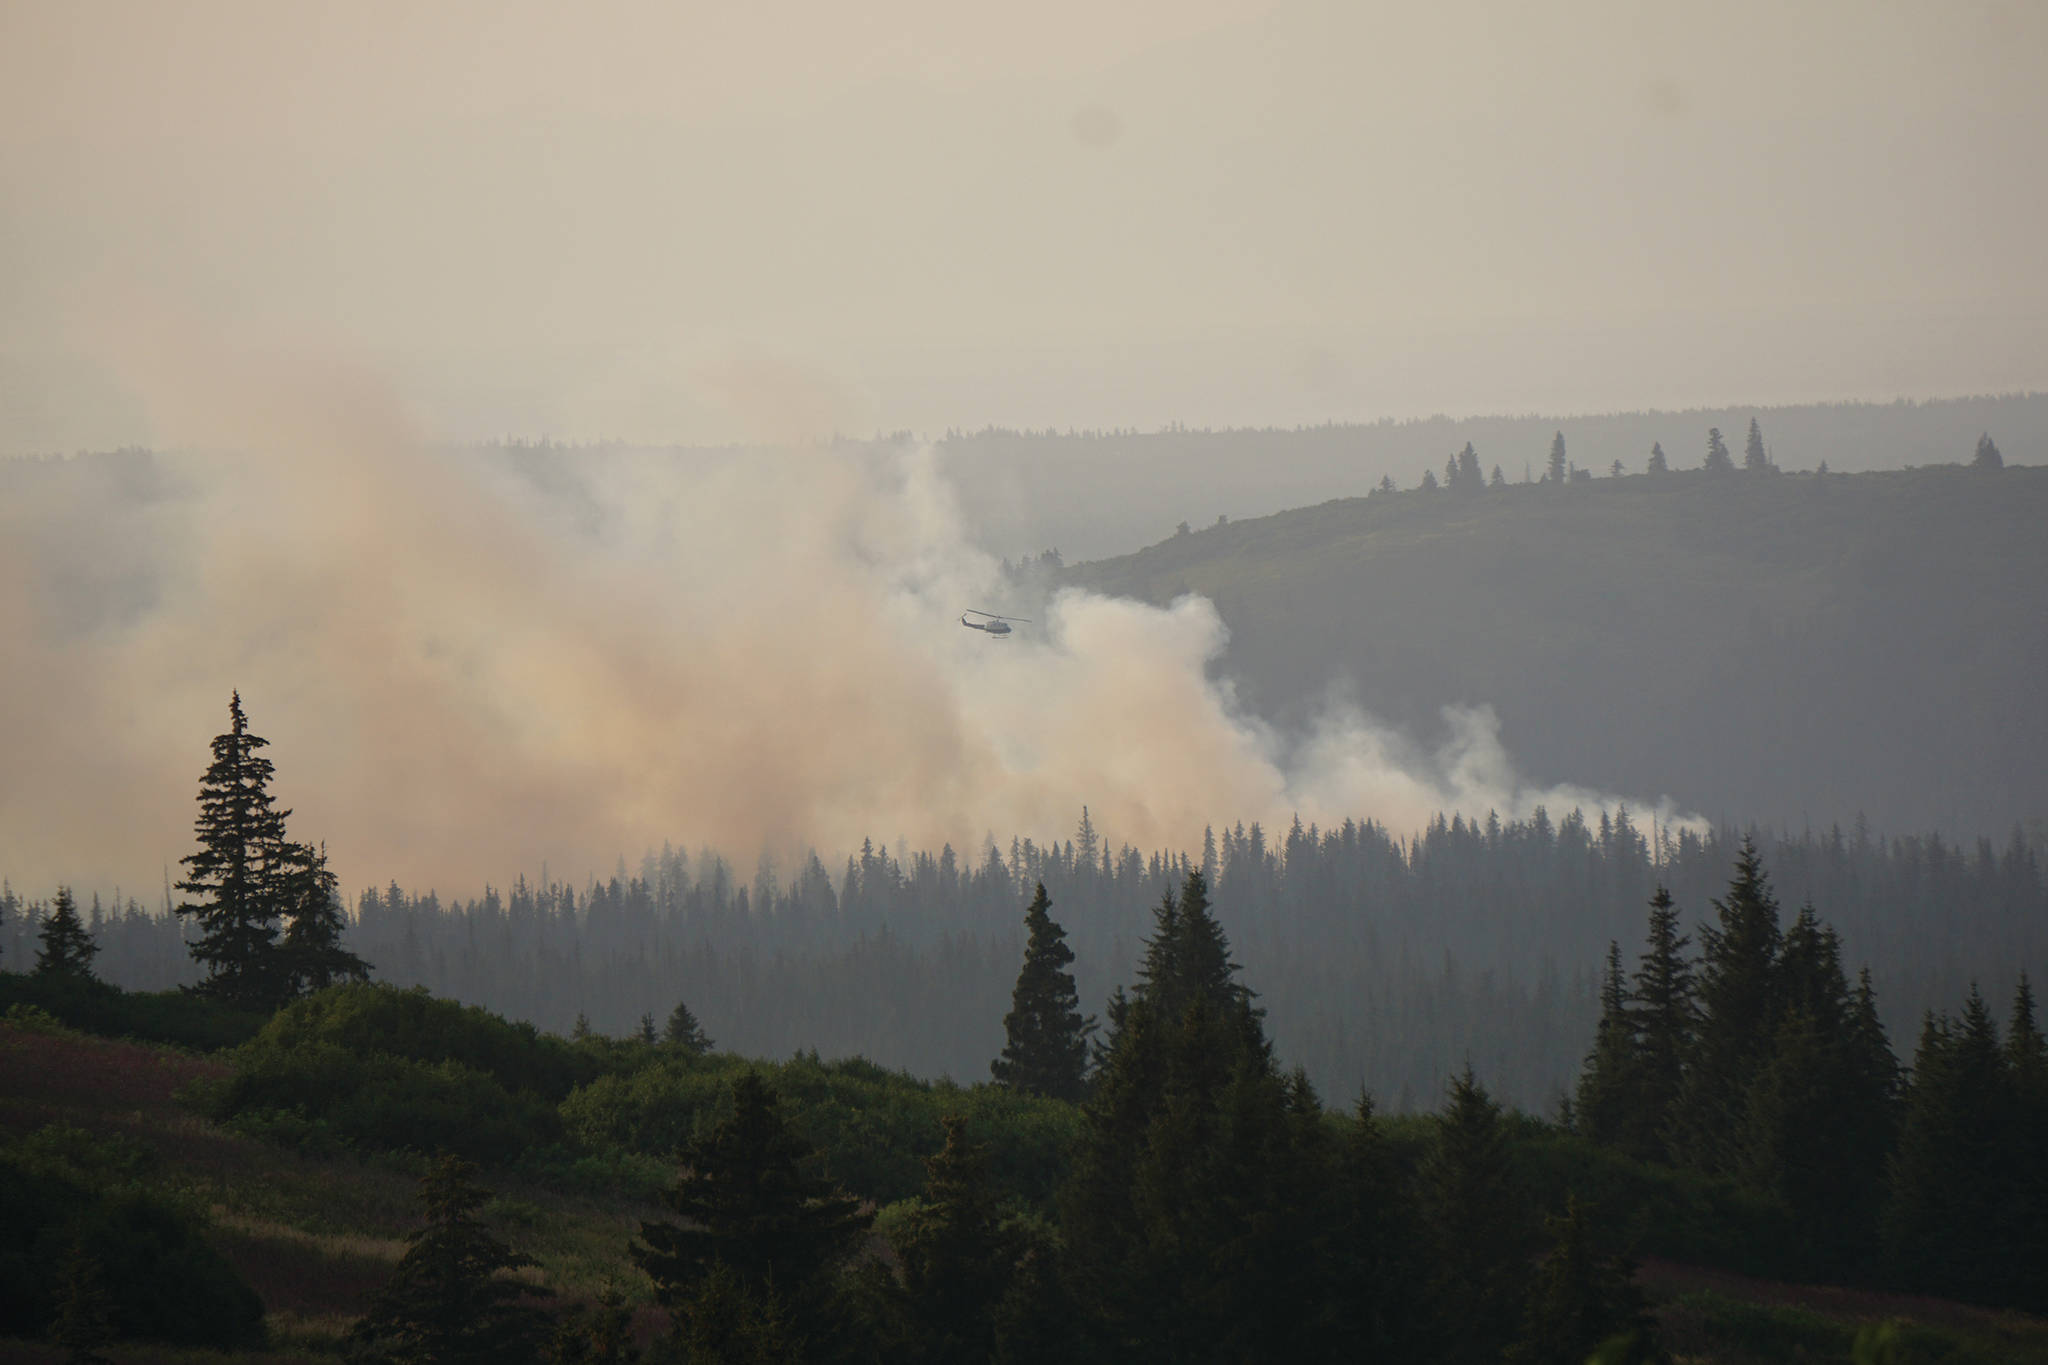 Michael Armstrong / Homer News                                 A helicopter flies over the North Fork fire as it burns near the south end of the North Fork Road on Sunday evening, Aug. 18, 2019, near Homer, Alaska, as seen from Diamond Ridge Road.